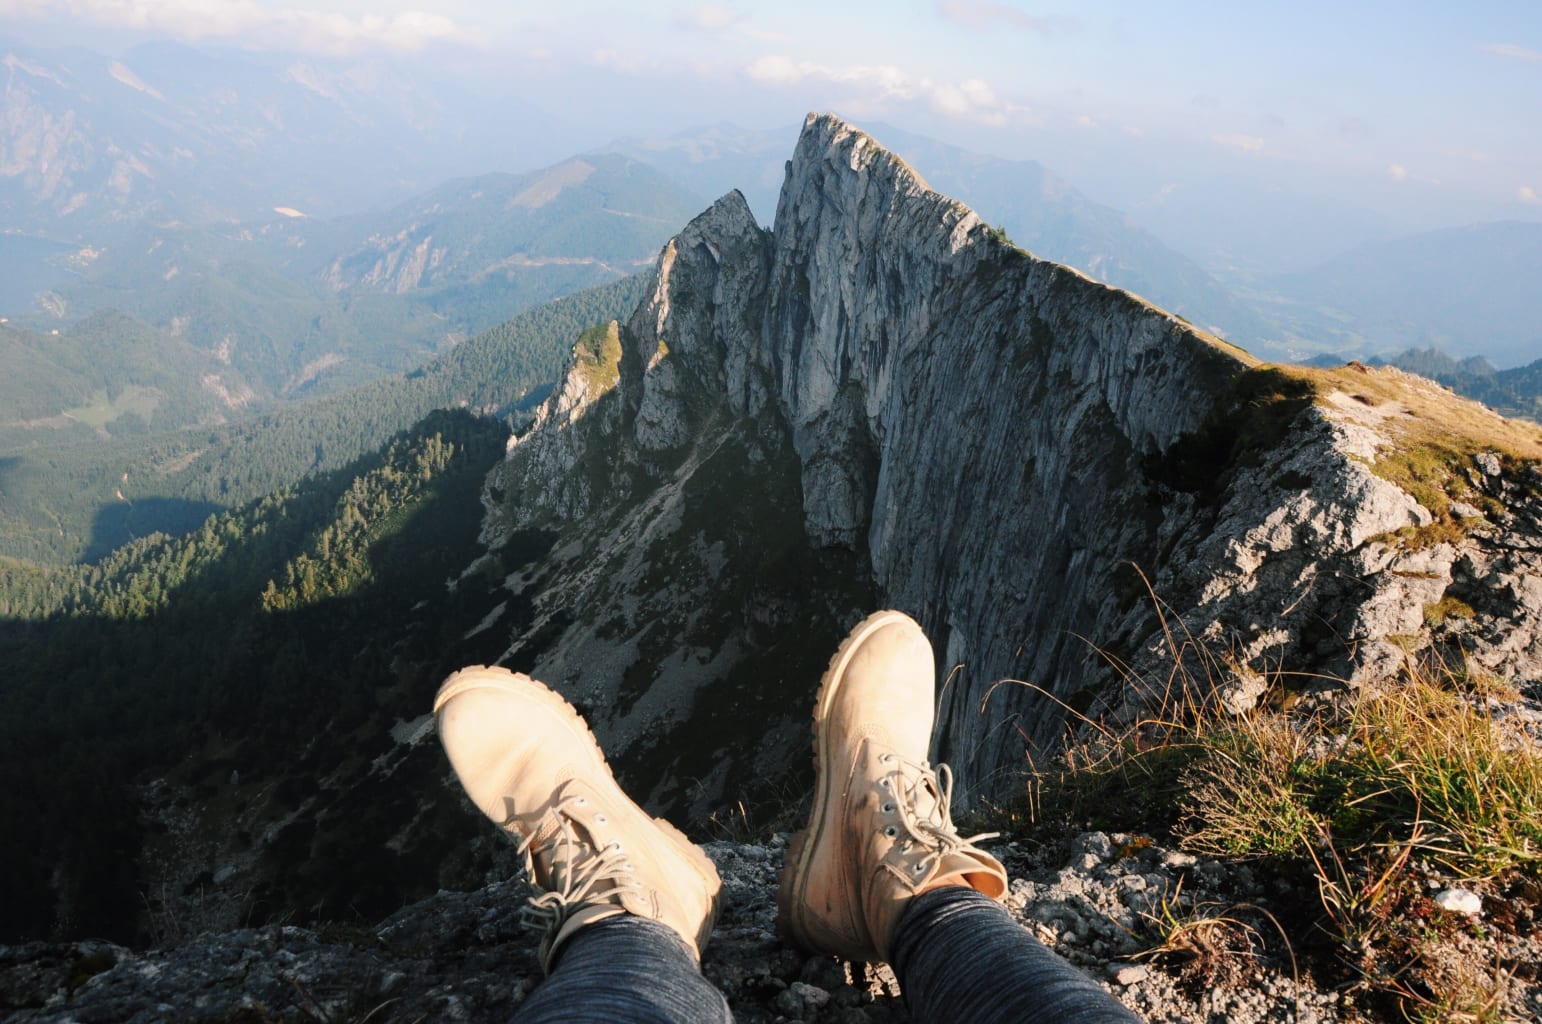 A student's feet resting on the ground in front of a mountain view in Austria.